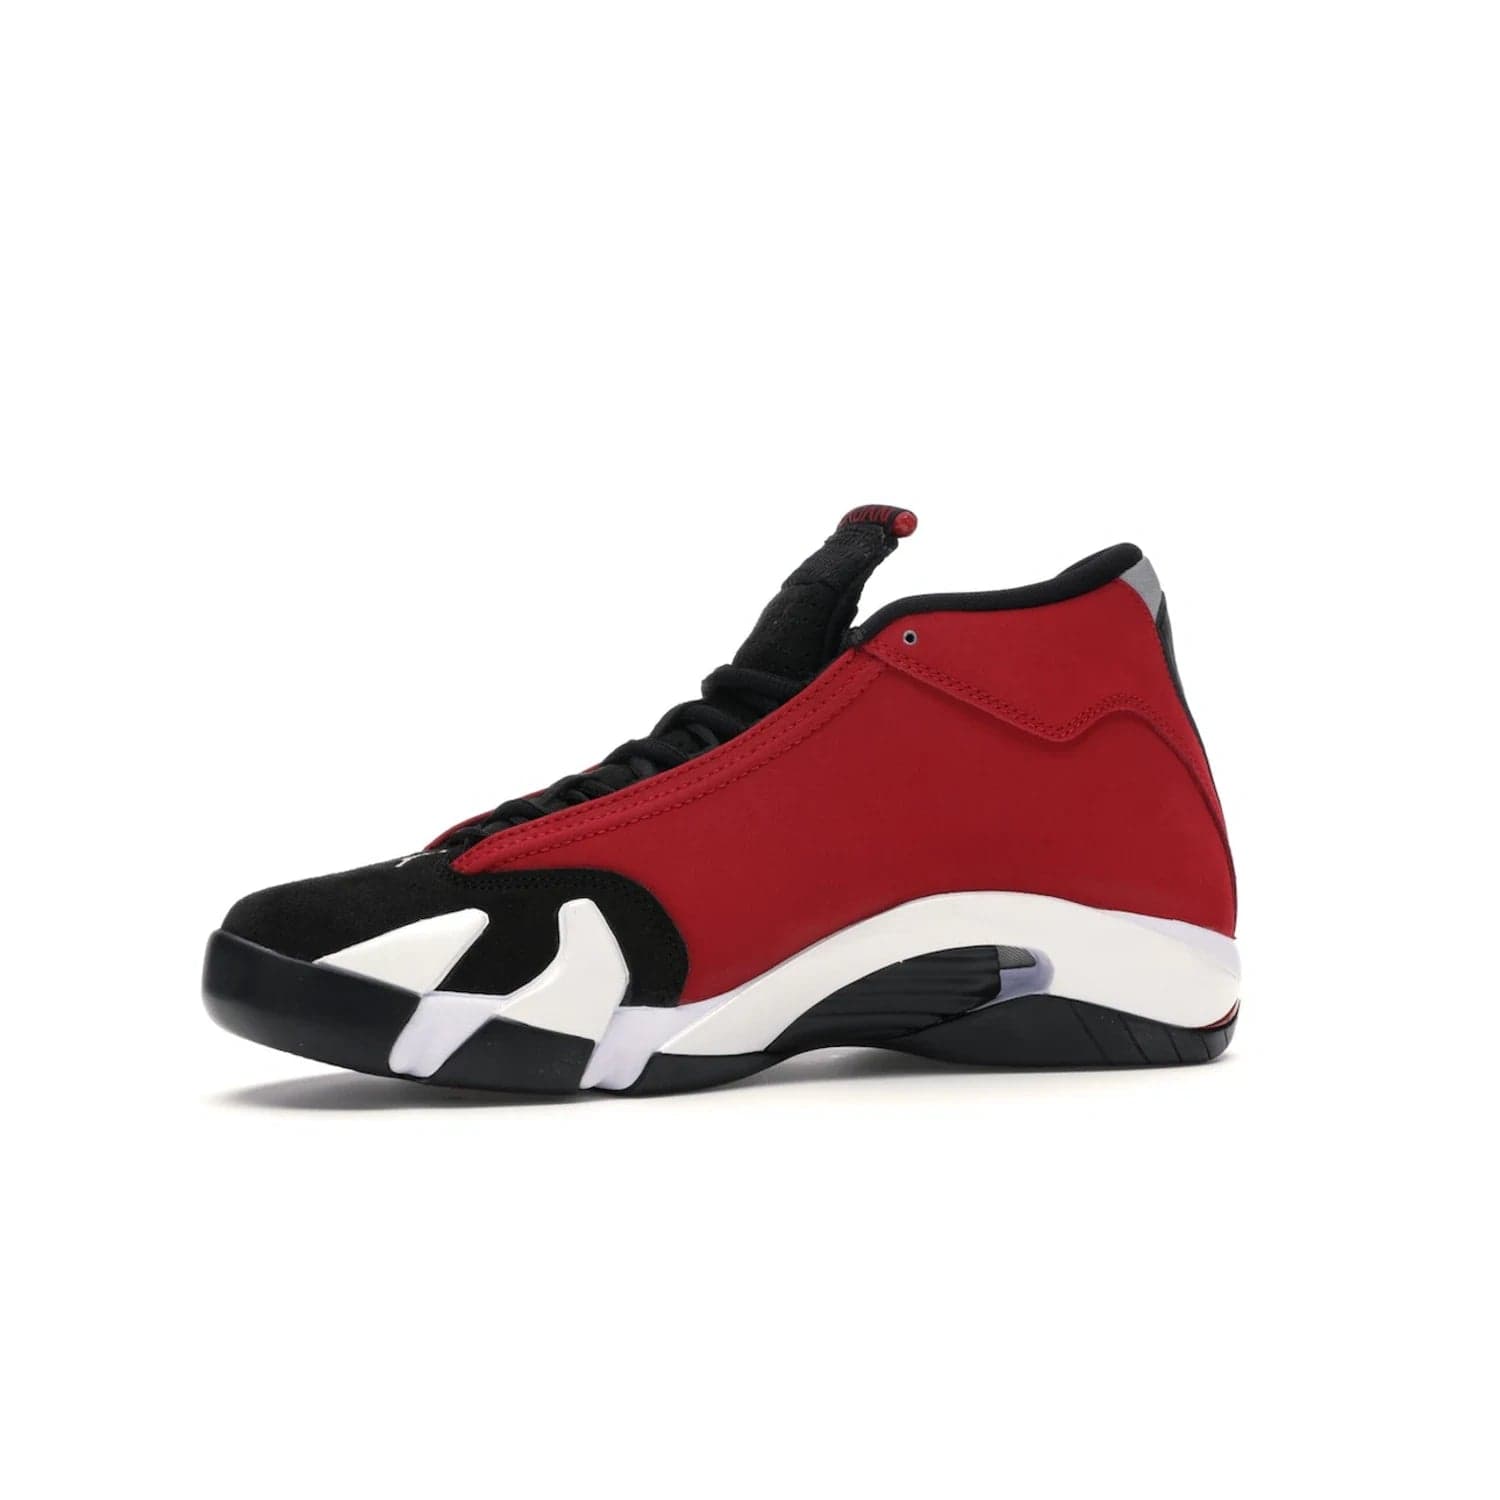 Jordan 14 Retro Gym Red Toro - Image 17 - Only at www.BallersClubKickz.com - Feel the Chicago Bulls energy with the Jordan 14 Retro Gym Red Toro! Black, red, and white design unites performance and fashion. Get your hands on this limited edition Jordan and show off your style today.